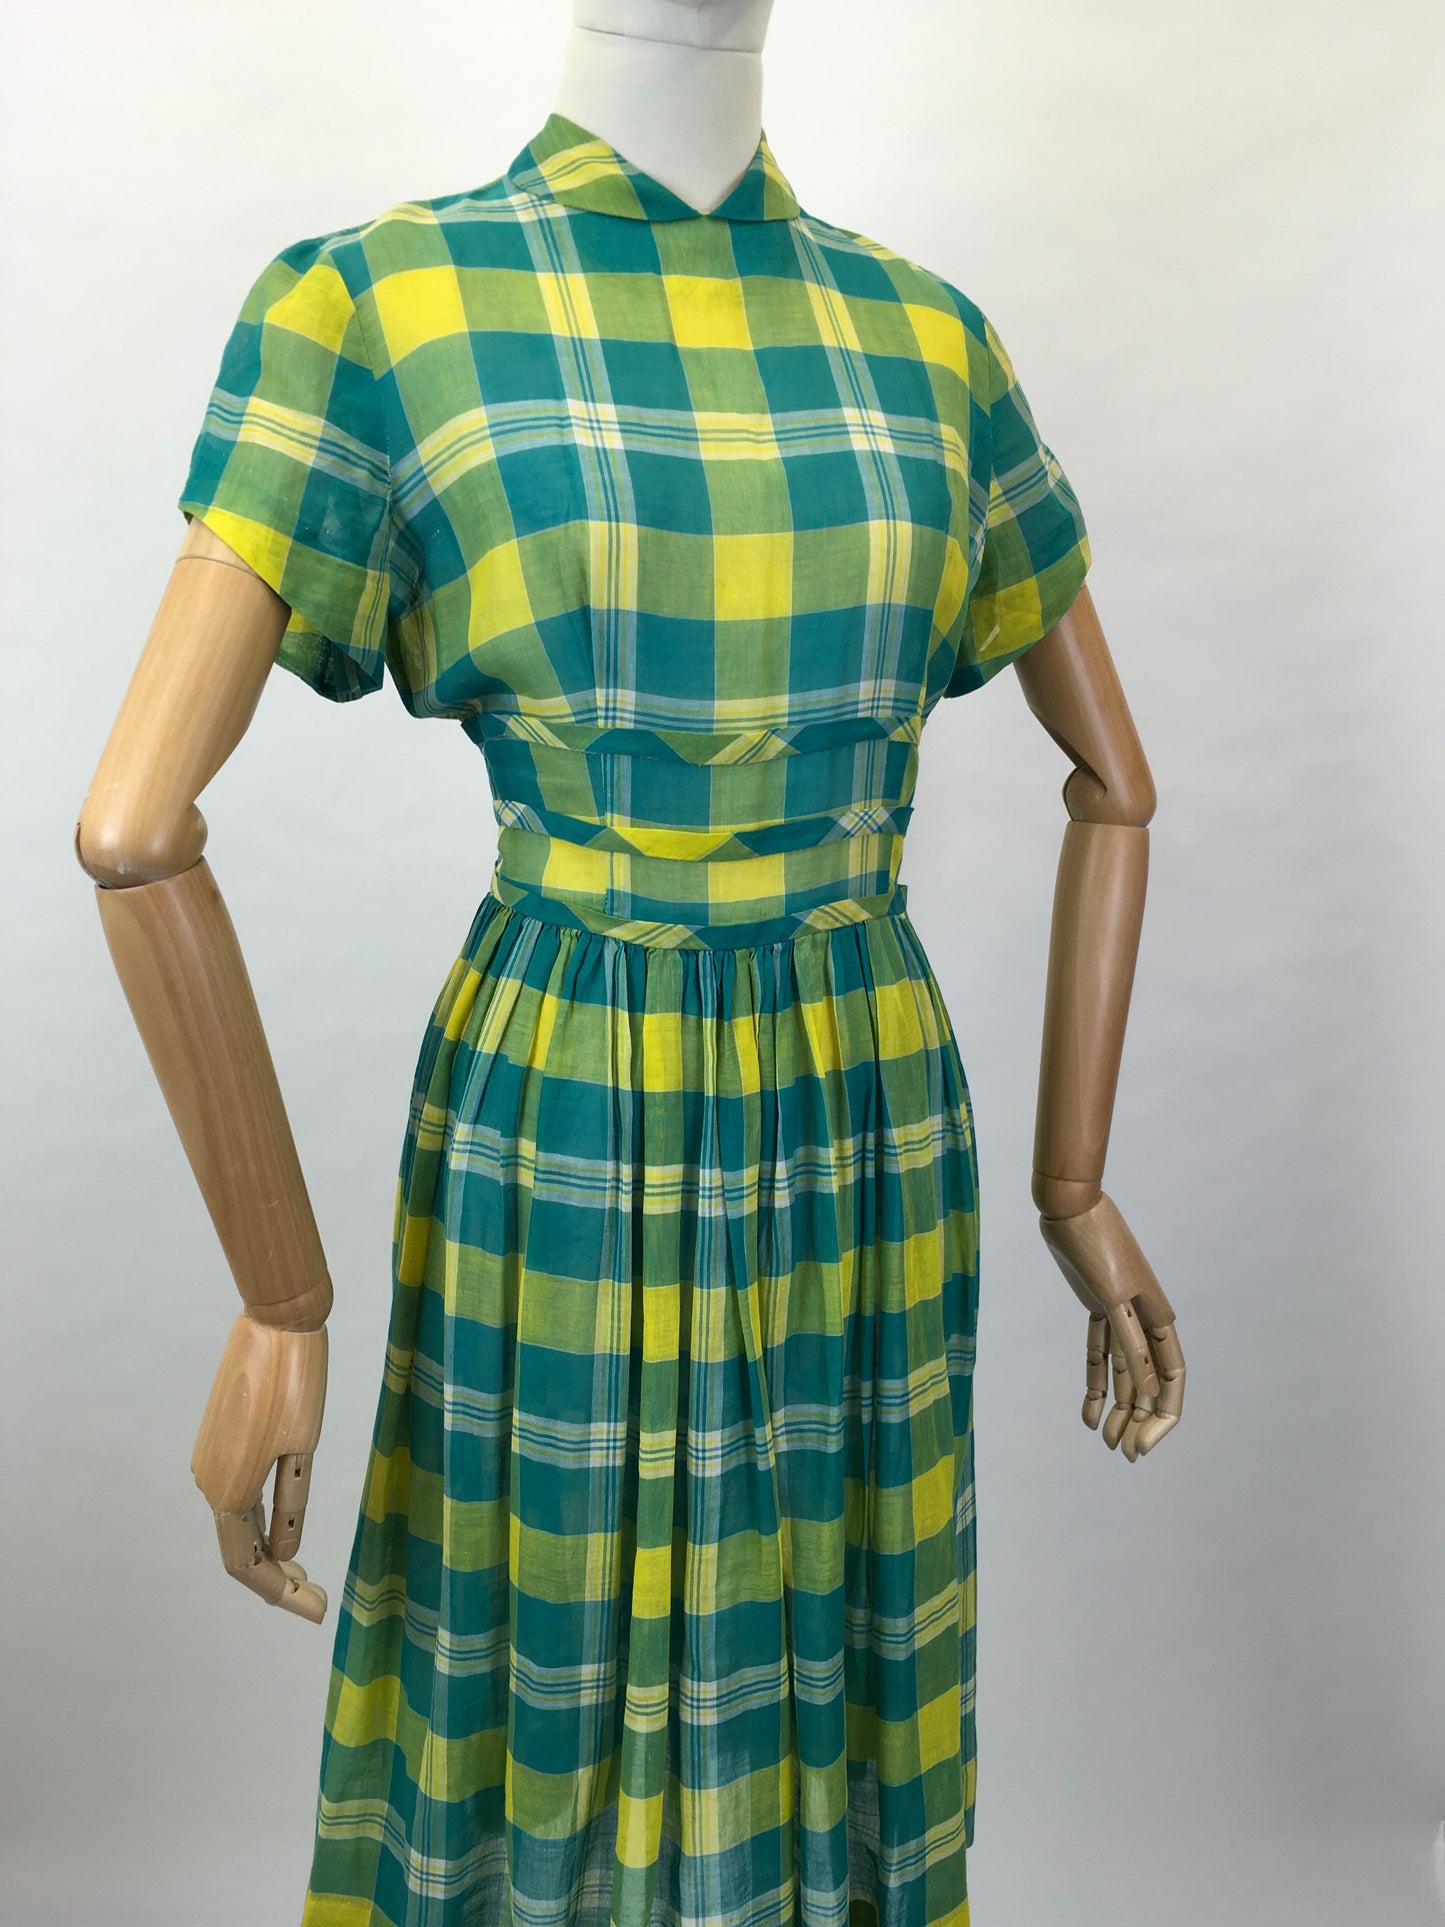 Original Early 1950s Cotton Lawn Day Dress - In a Beautiful Vivid Green and Yellow Plaid